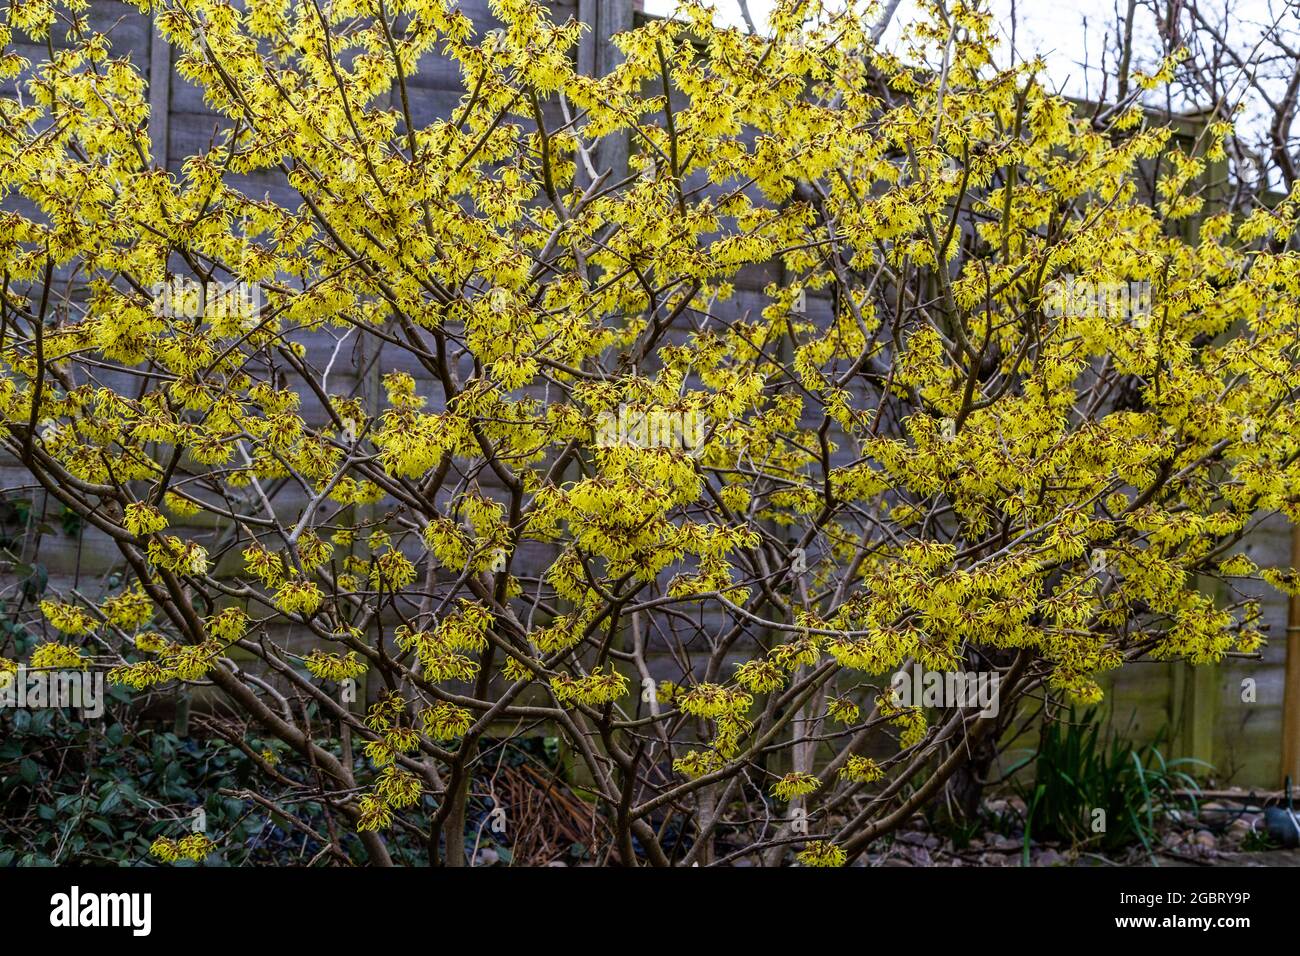 A Witch Hazel in full bloom. The yellow flowers provide colour in a winter garden. (Hamamelis) Stock Photo